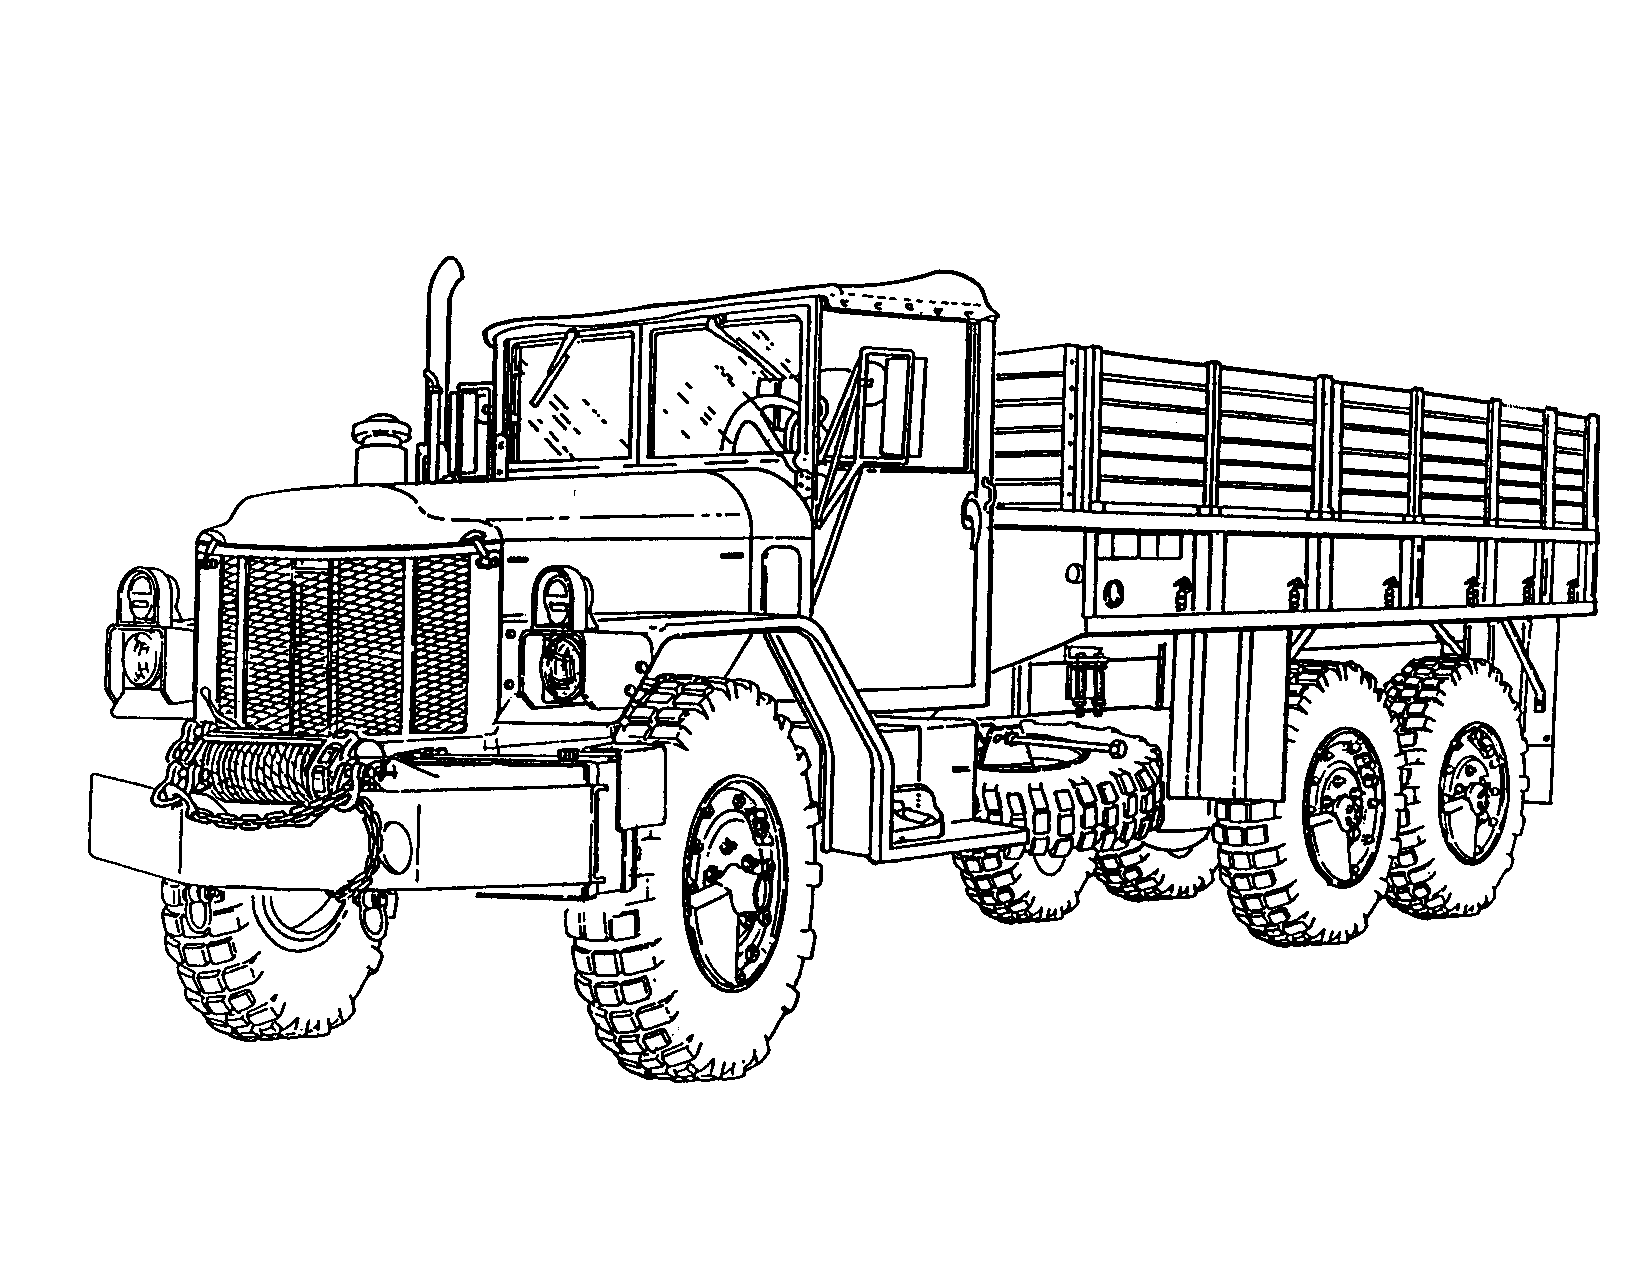 Printable Army Truck Coloring Pages Pdf - Printable Army Truck Coloring Pages